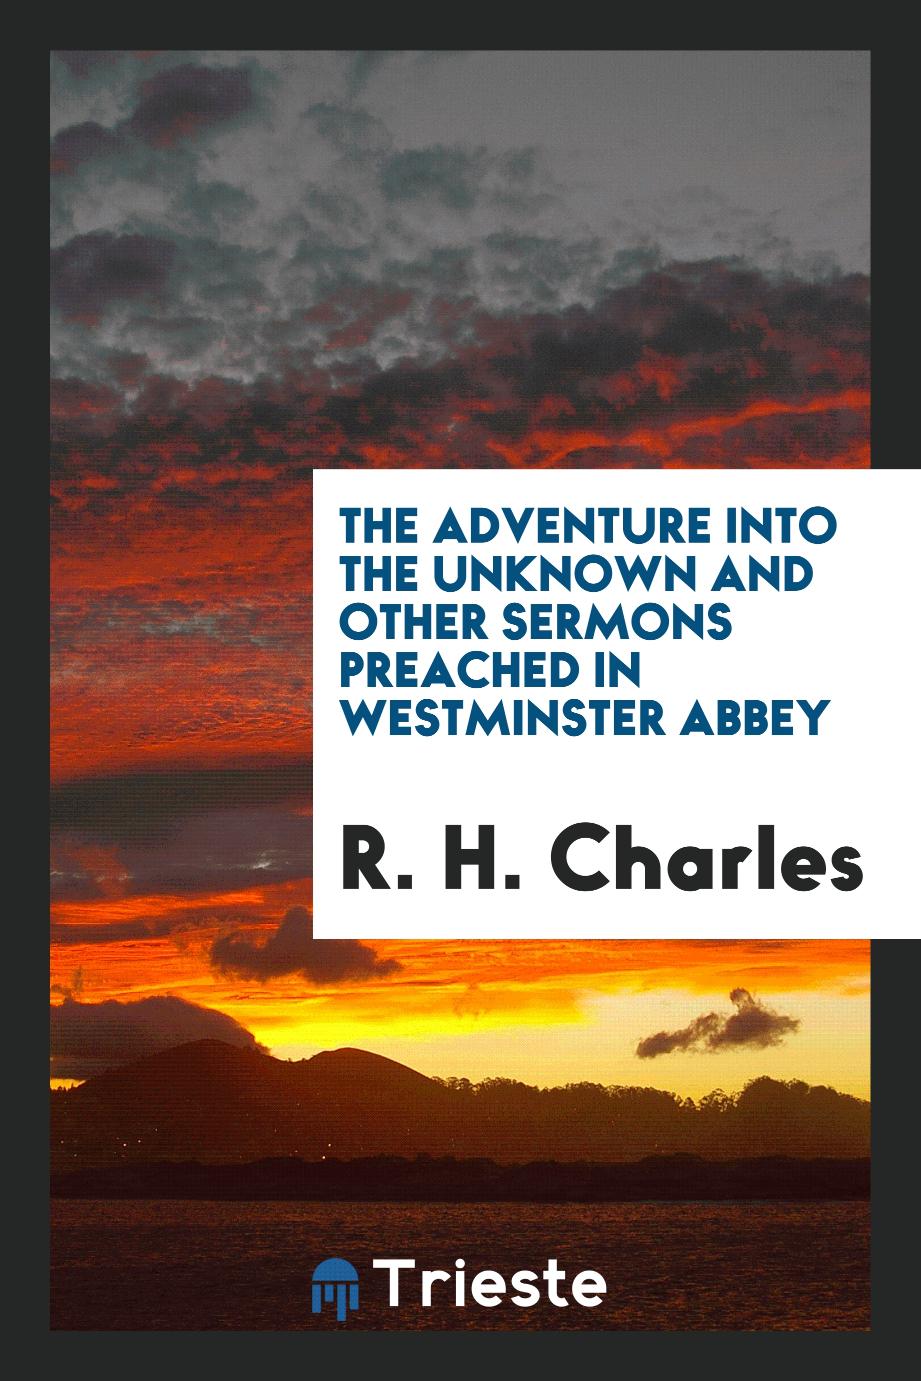 The adventure into the unknown and other sermons preached in Westminster Abbey